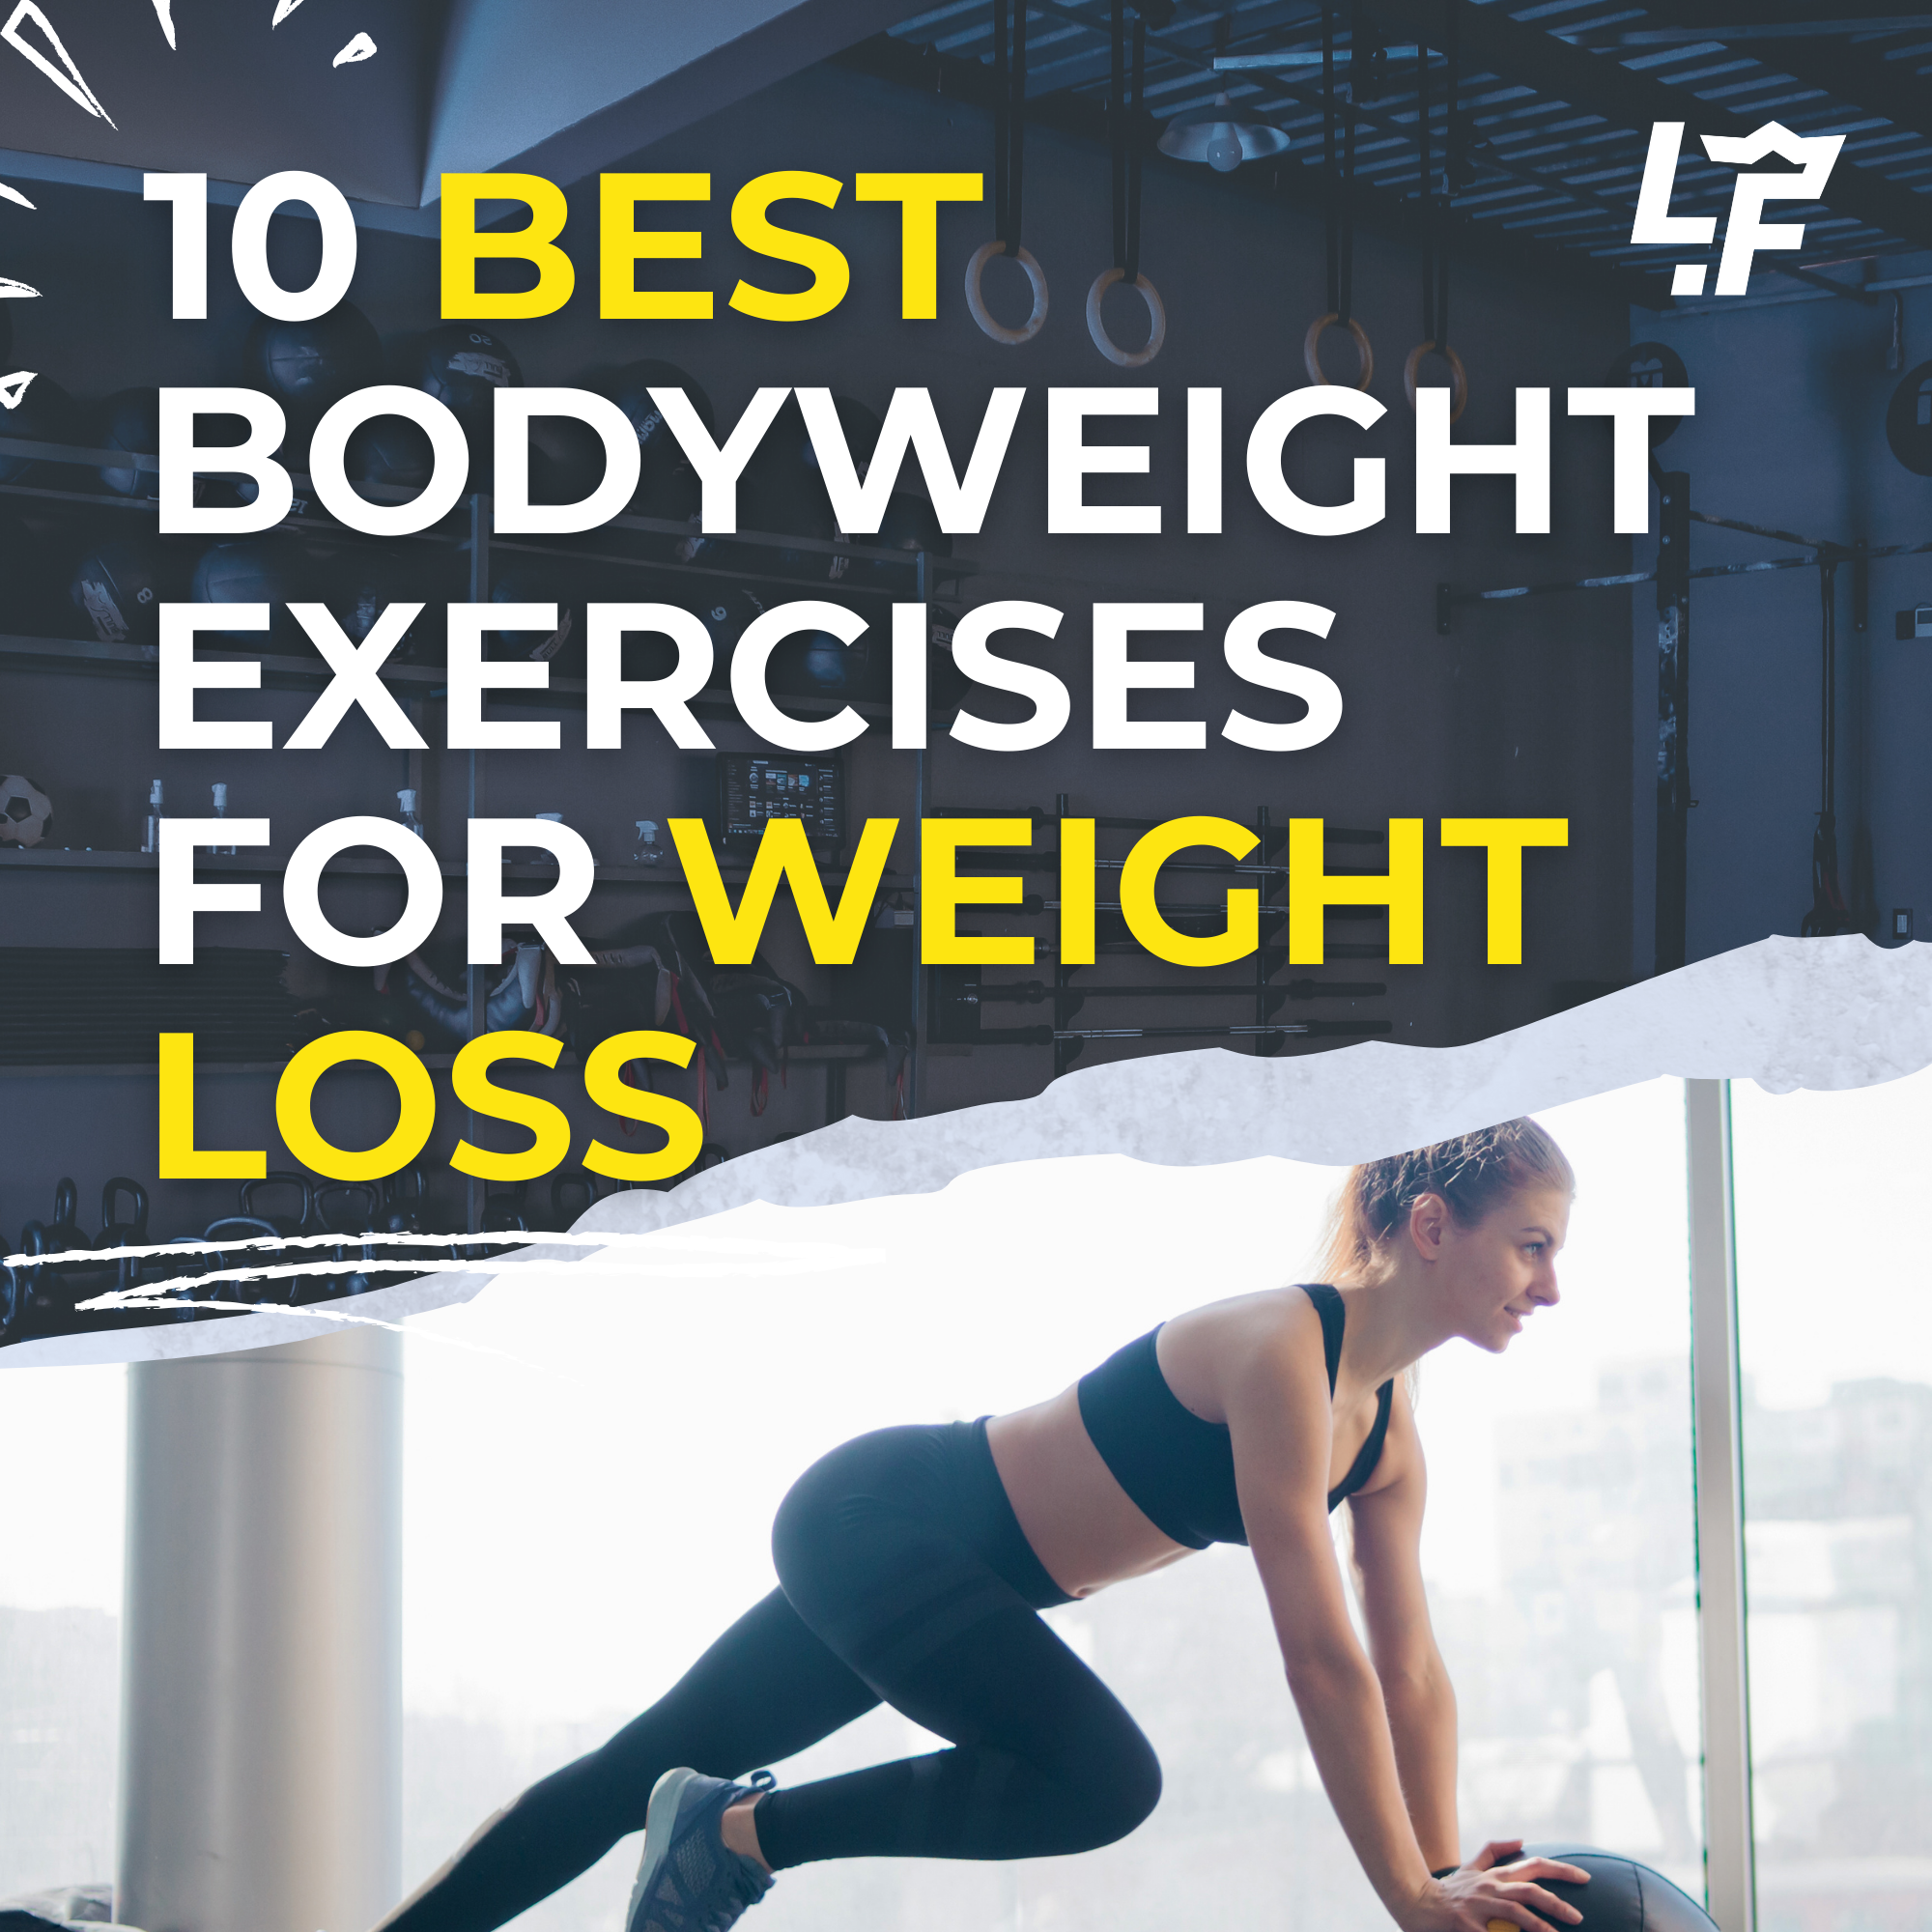 10 Best Bodyweight Exercises For Weight